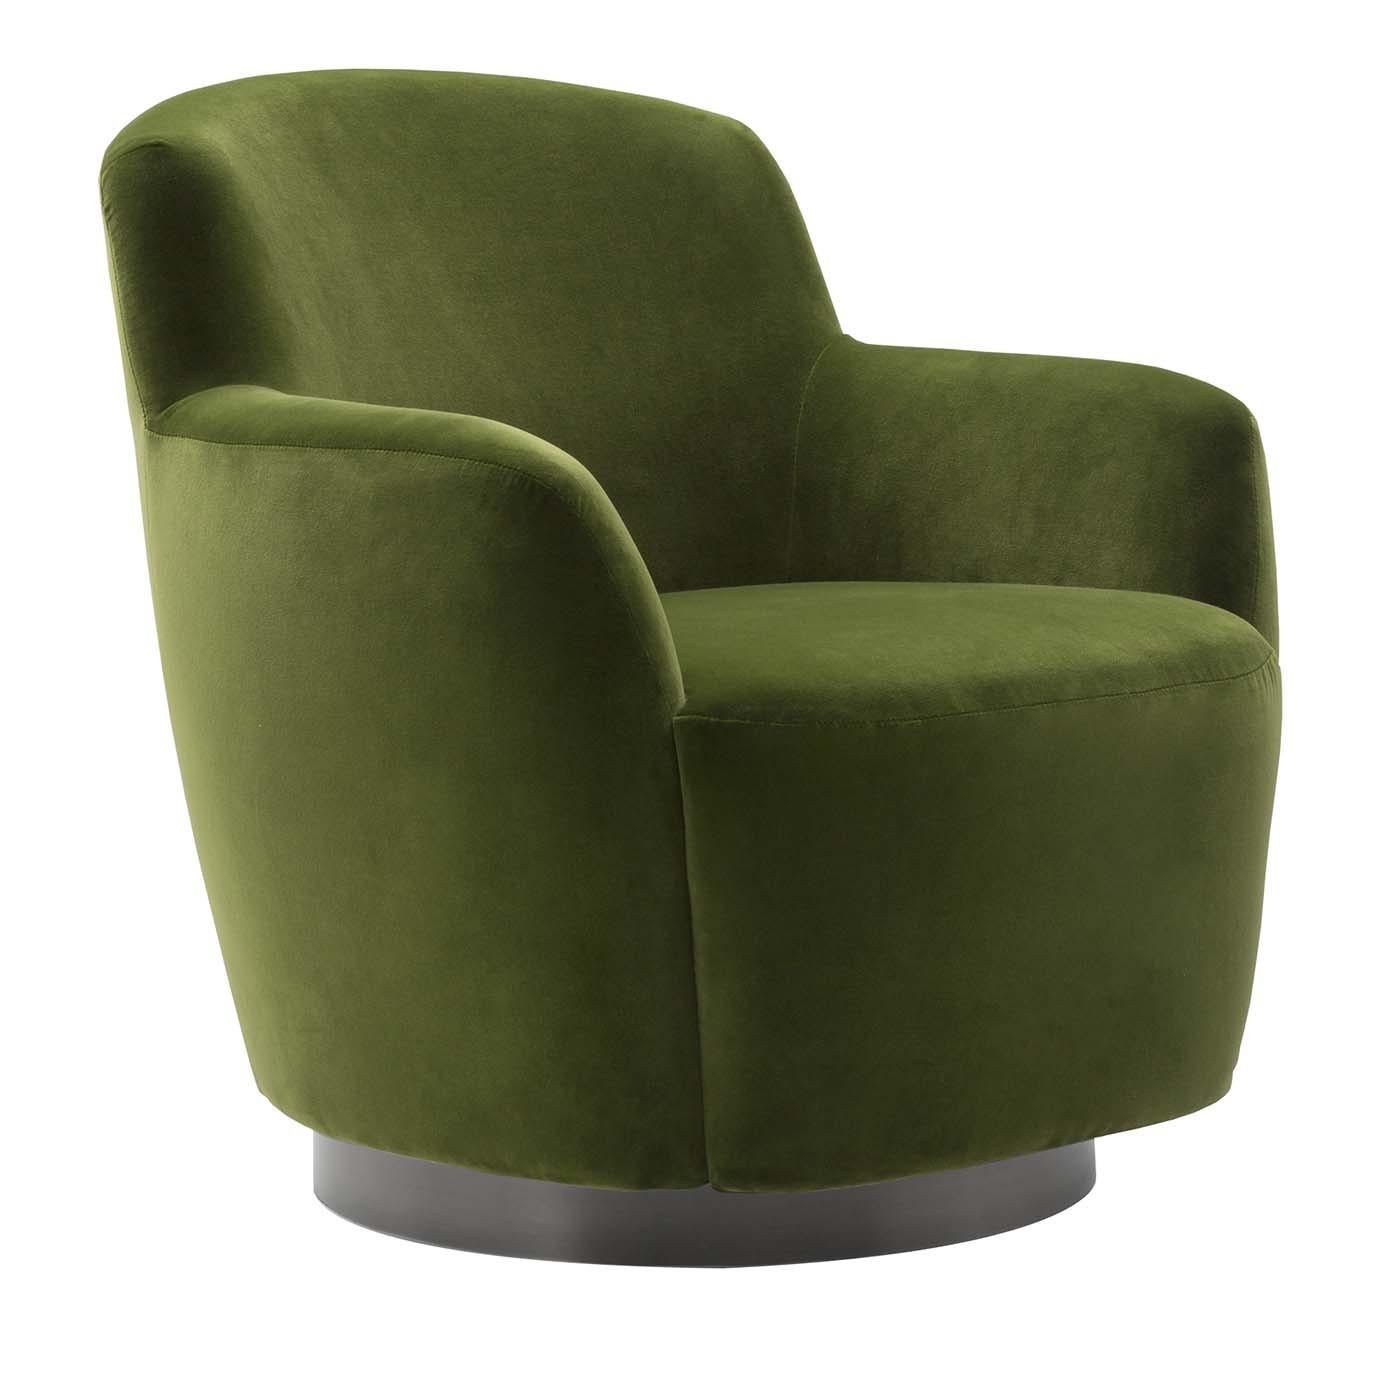 Evoking the elegance of the 1960s, this sophisticated armchair is distinctive for its enveloping shape and retro-chic flavor. Inspired by vintage furniture, it is also available with a higher backrest (90cm high). It is completely revolving thanks